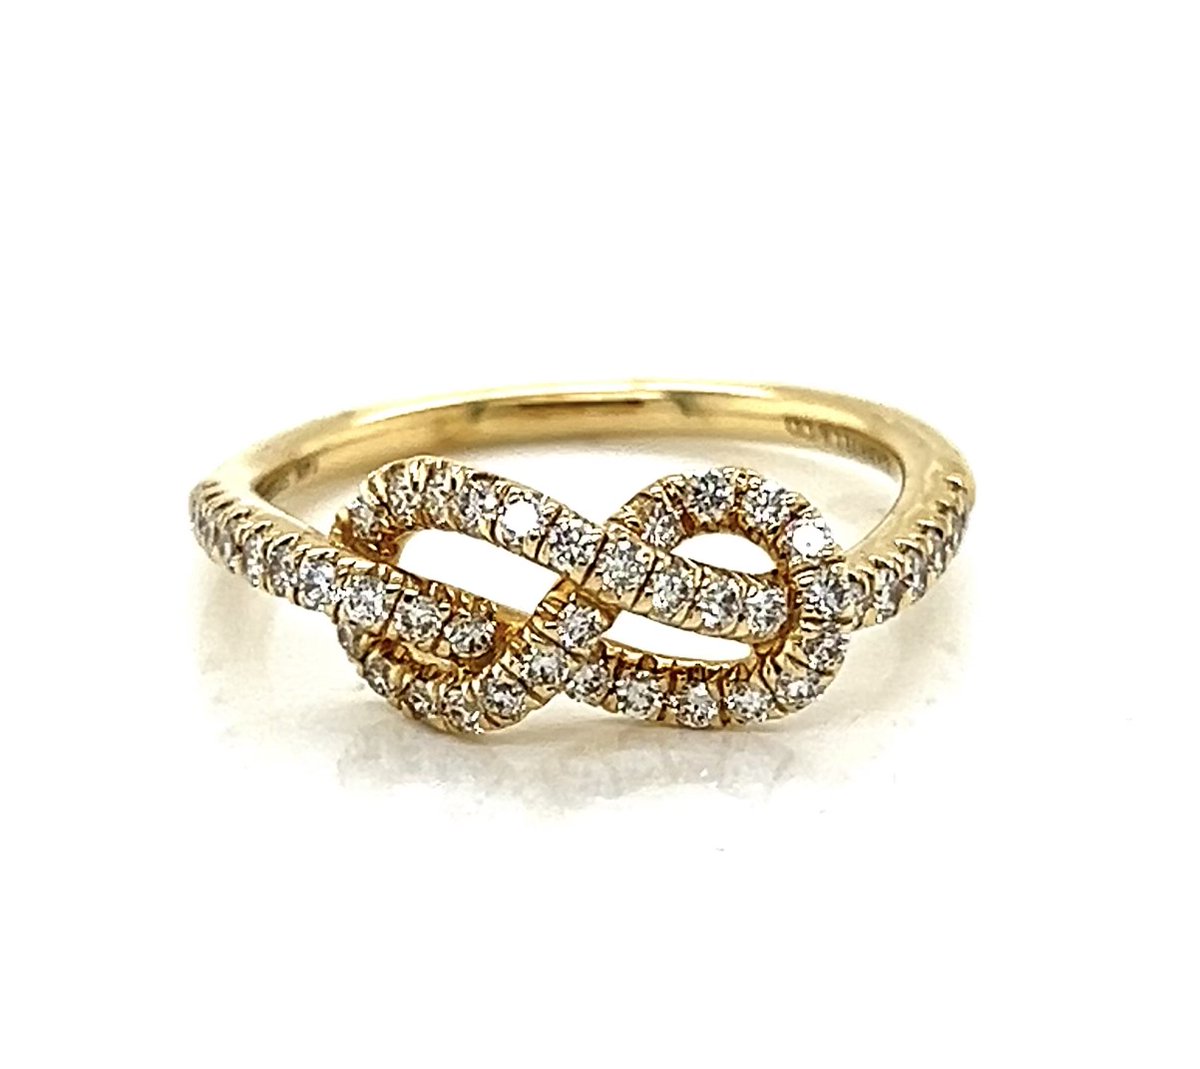 This gorgeous love knot ring is available in yellow and white gold! 😍 who wants one?🙋‍♀️ 110-05944 #itsaraywardring #diamonds #loveishere #bridalmonth #loveknotring #ring #preferredjeweler #thinkrayward #ardmoreok #shoplocal